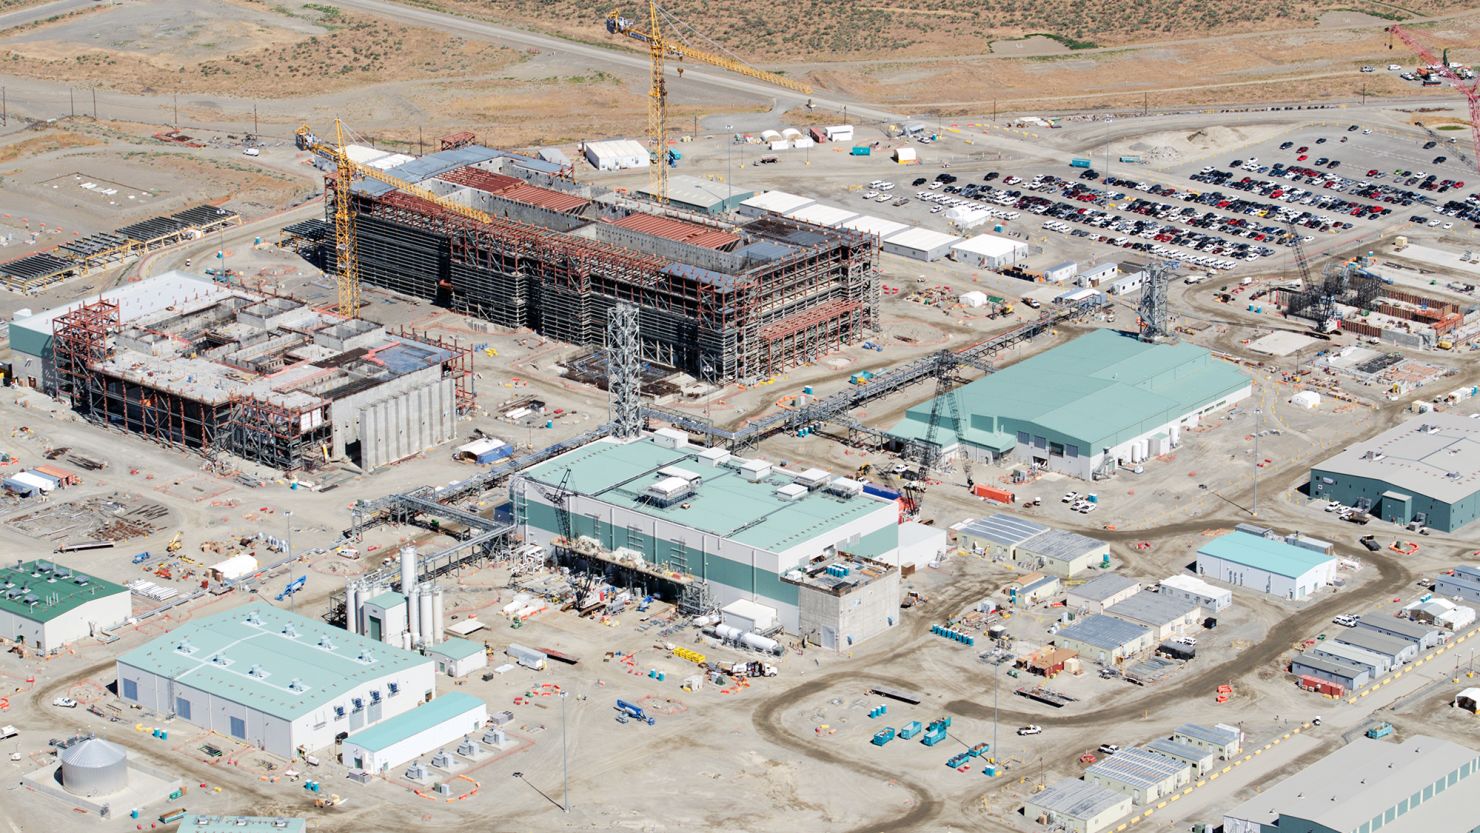 The Hanford Vitrification Plant is charged with solidifying liquid radioactive waste from the Hanford Site.